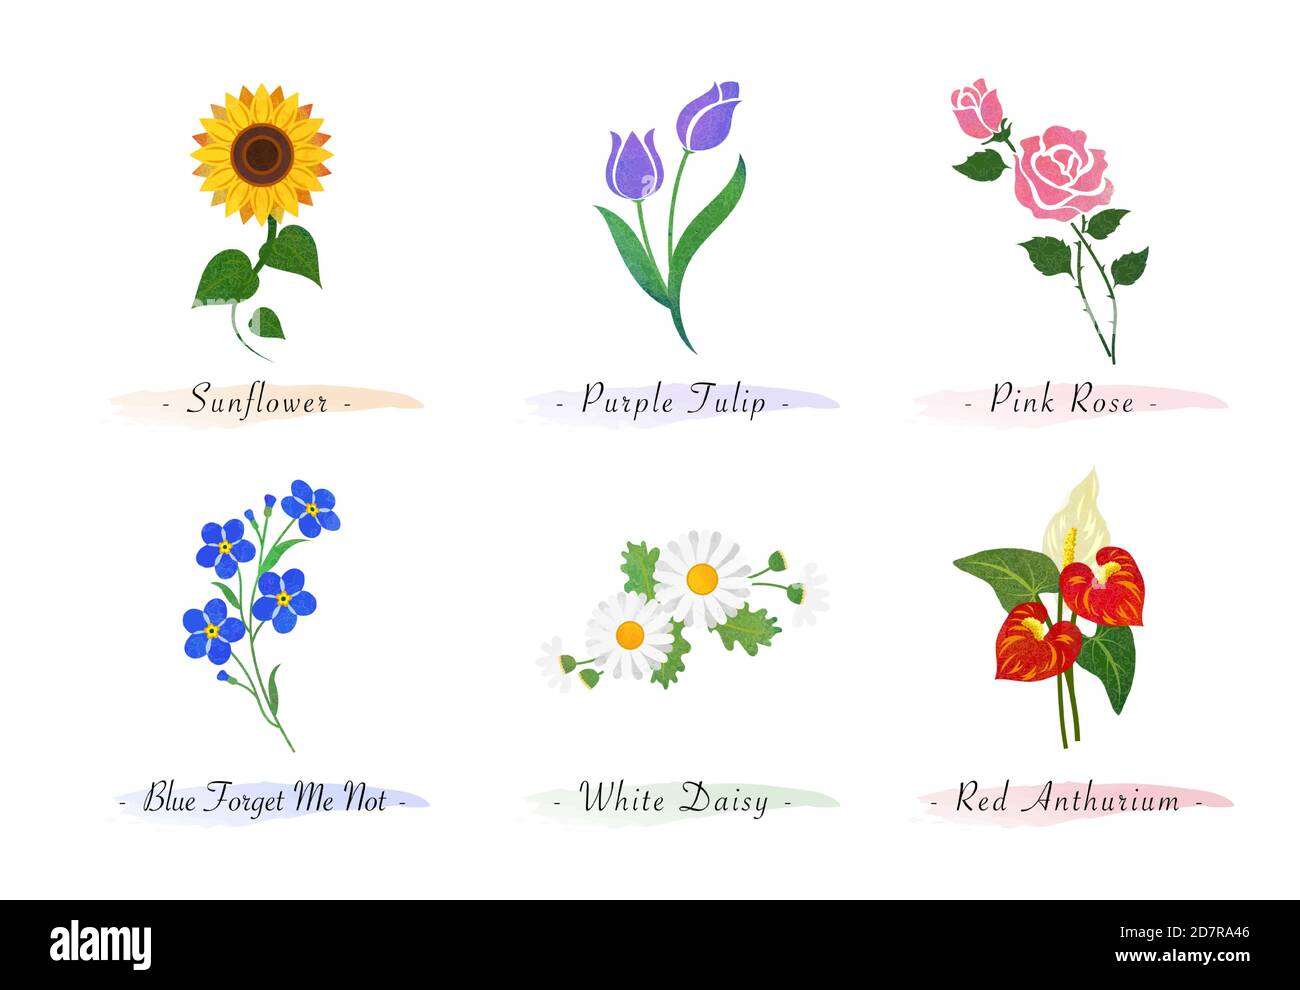 681 Carnation Flower Tattoo Royalty-Free Photos and Stock Images |  Shutterstock